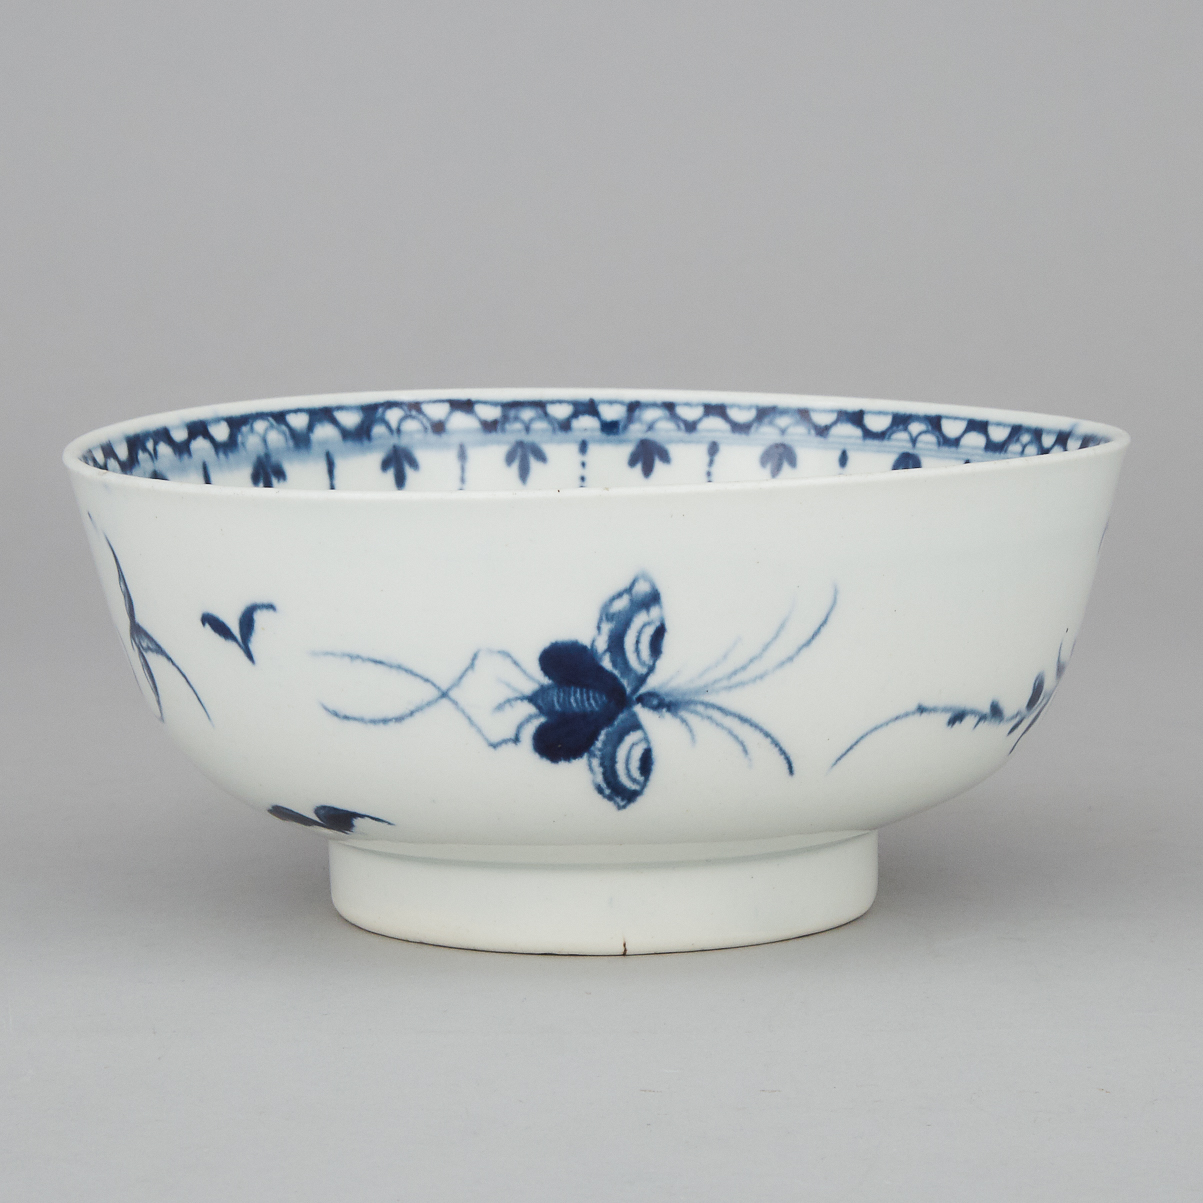 Worcester Blue and White 'Peony' Bowl, c.1765-75